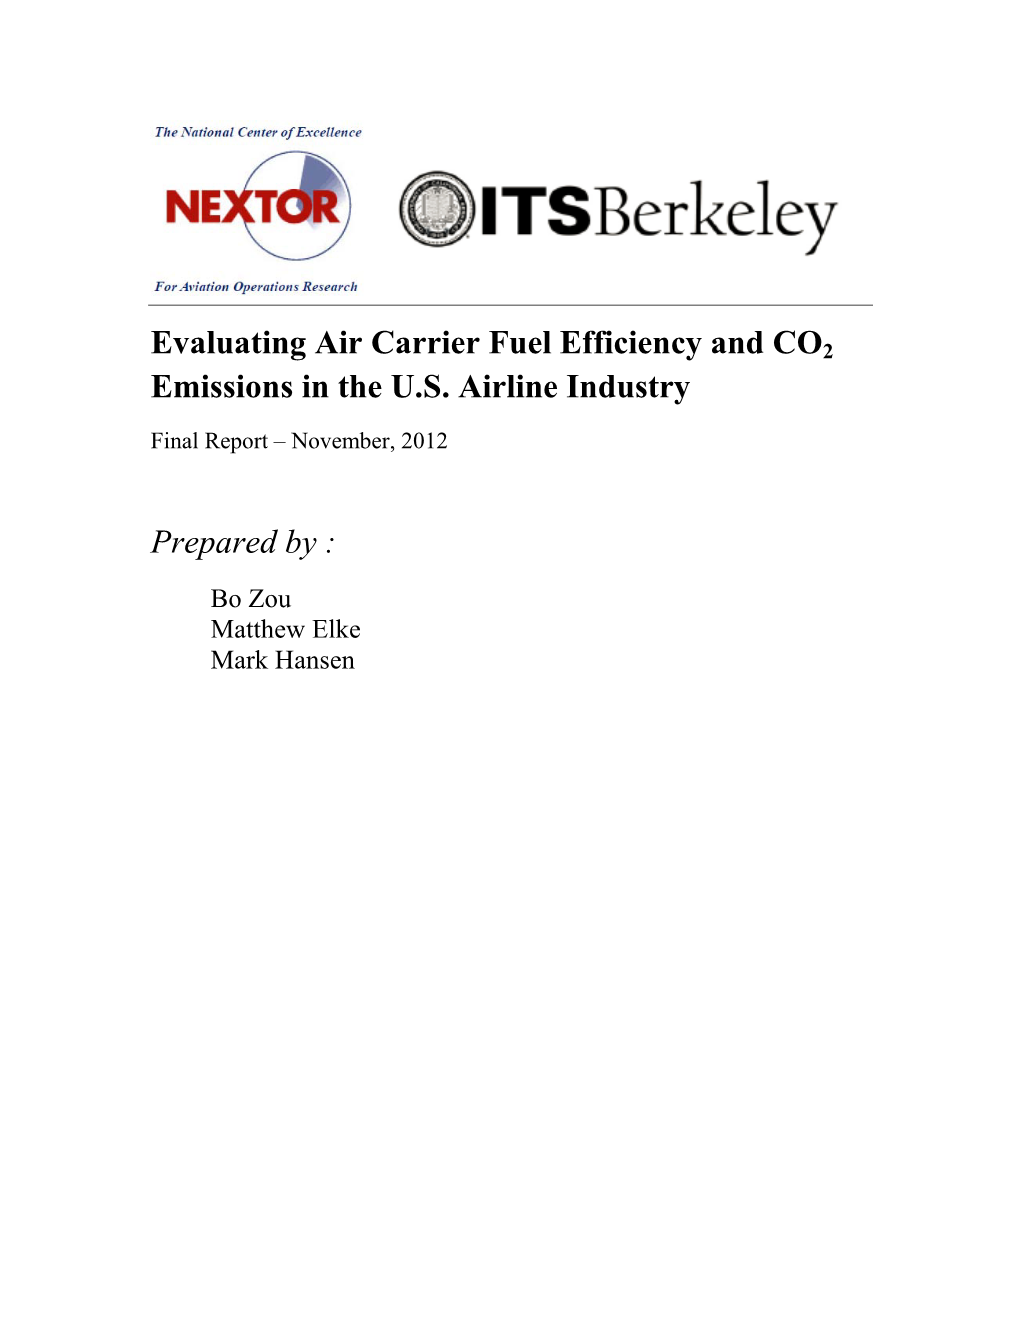 Evaluating Air Carrier Fuel Efficiency and CO2 Emissions in the U.S. Airline Industry